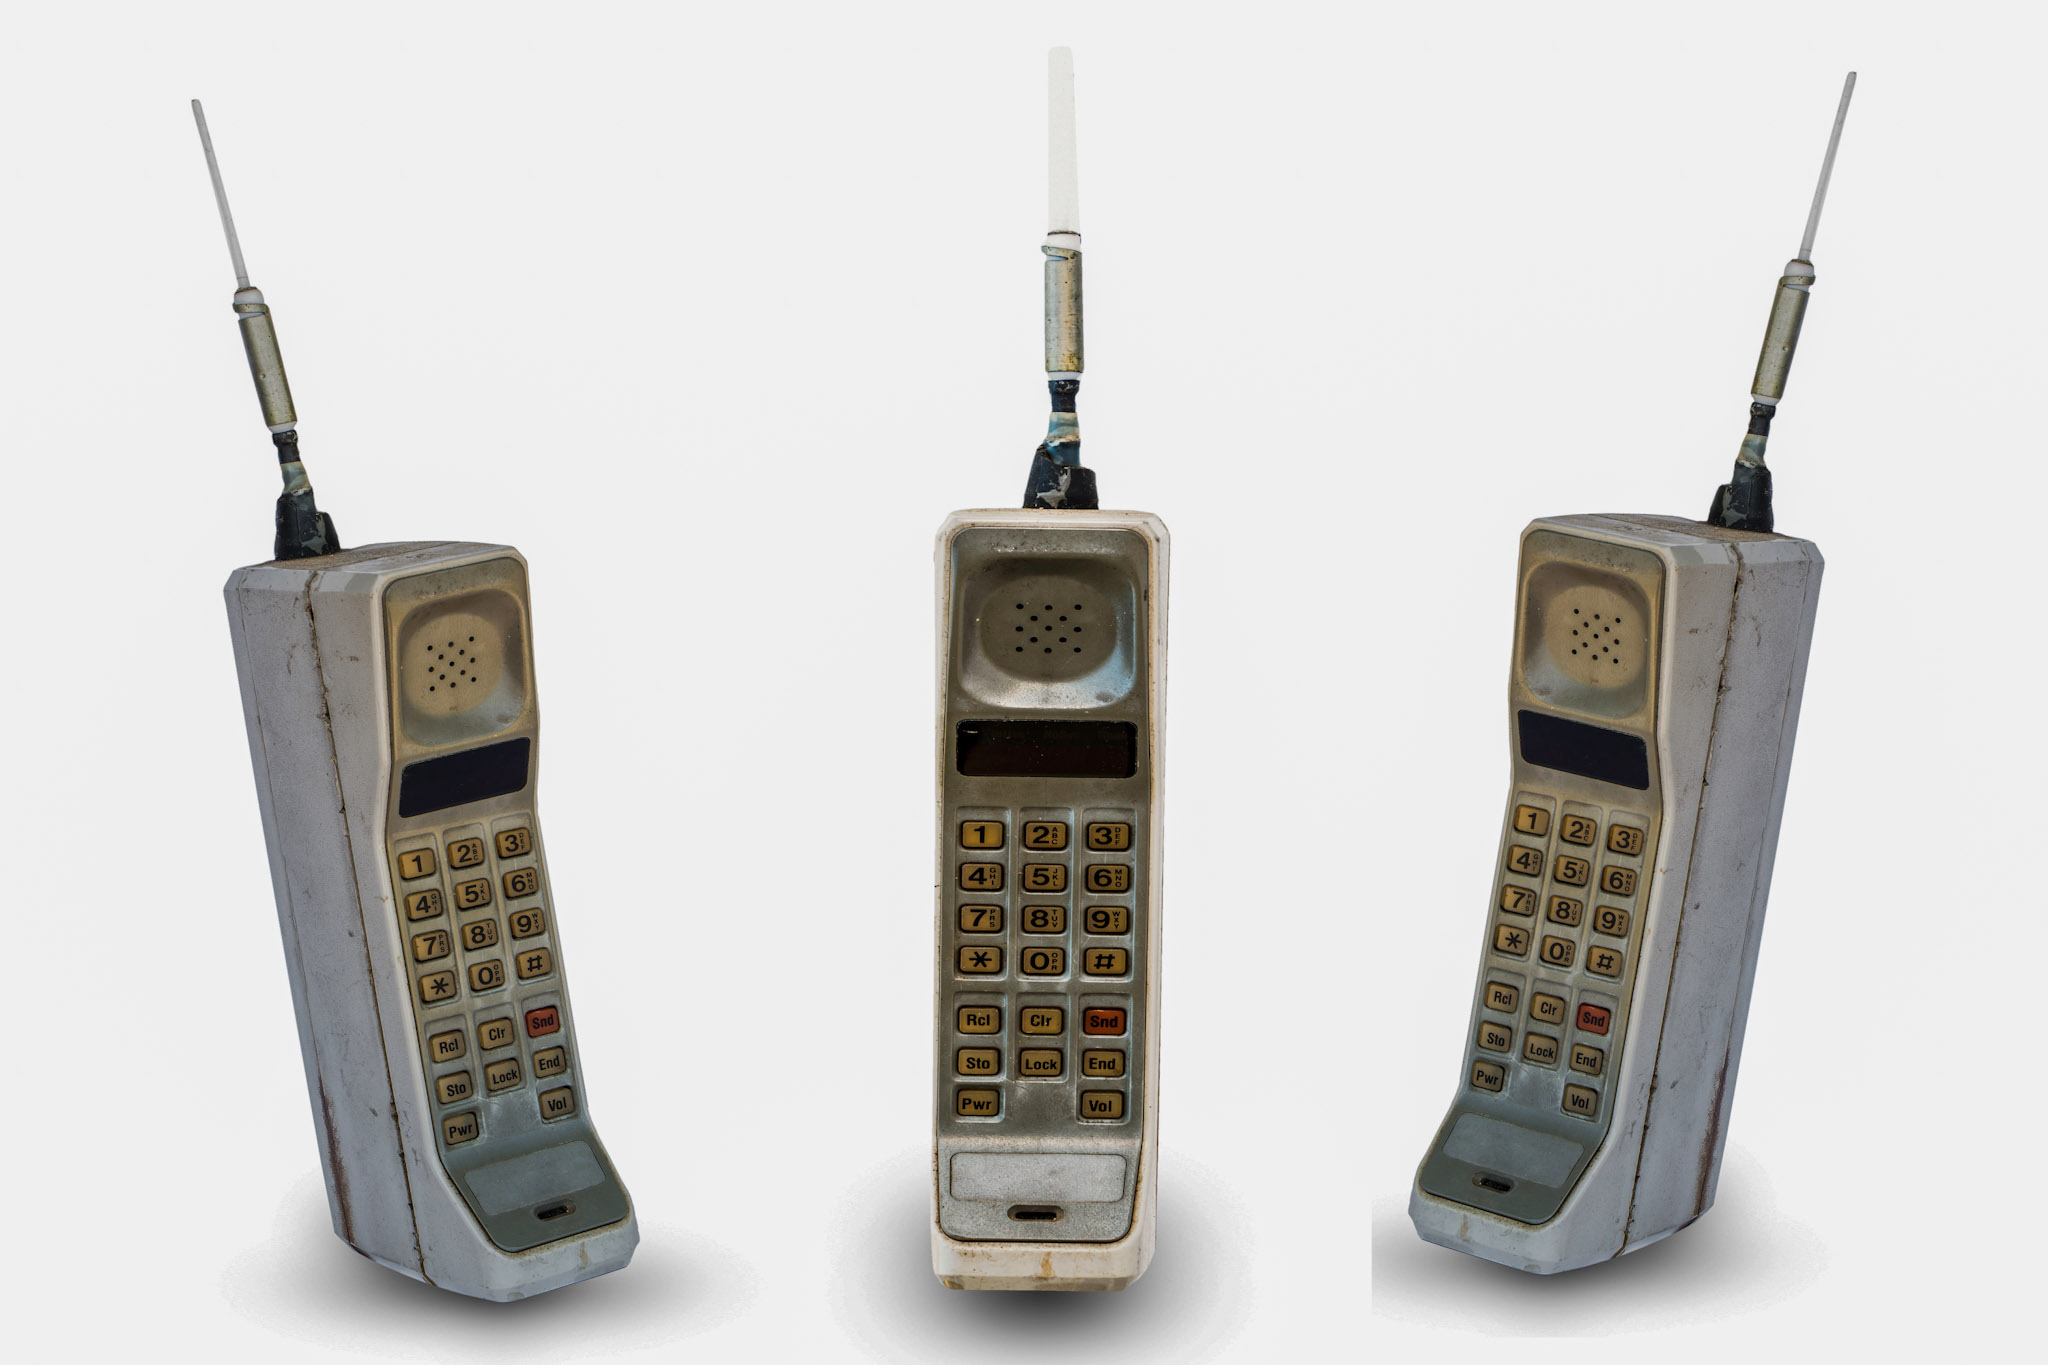 stock photo of a Motorola DynaTac - a direct descendant of the prototype used to make the first-ever mobile phone call